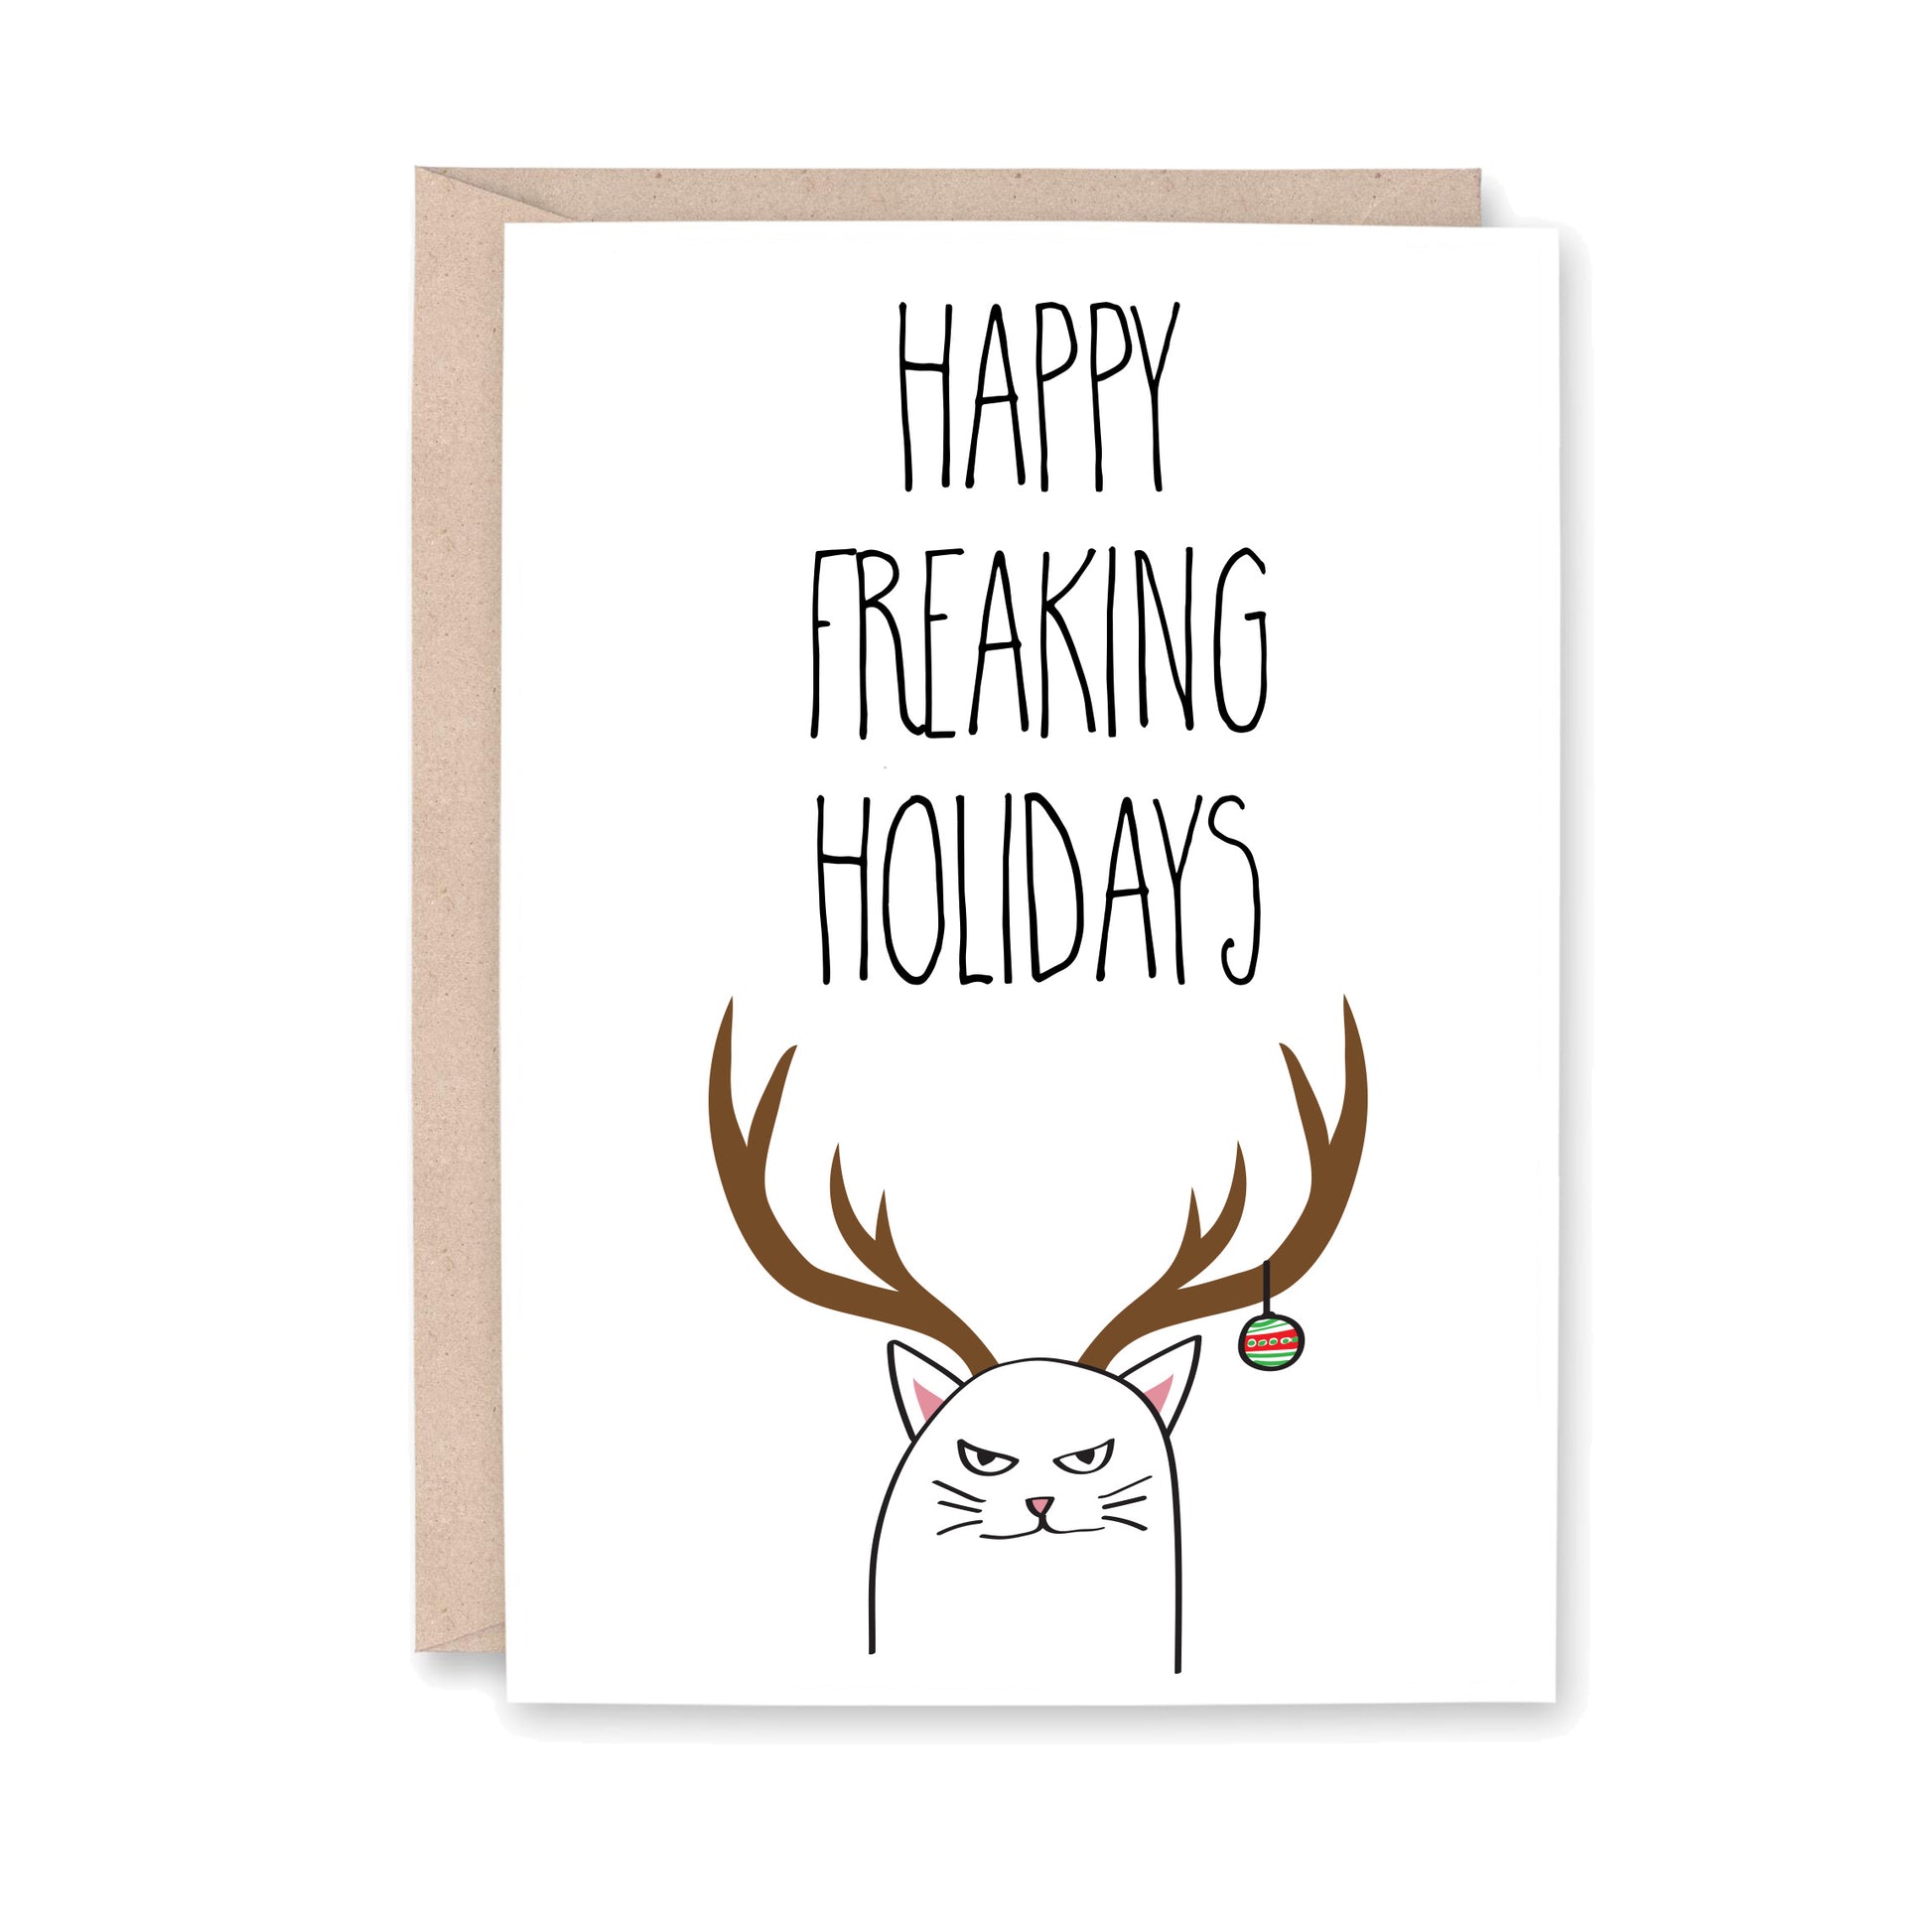 Happy Freaking Holidays card with a cat with antlers and a snarky half smile